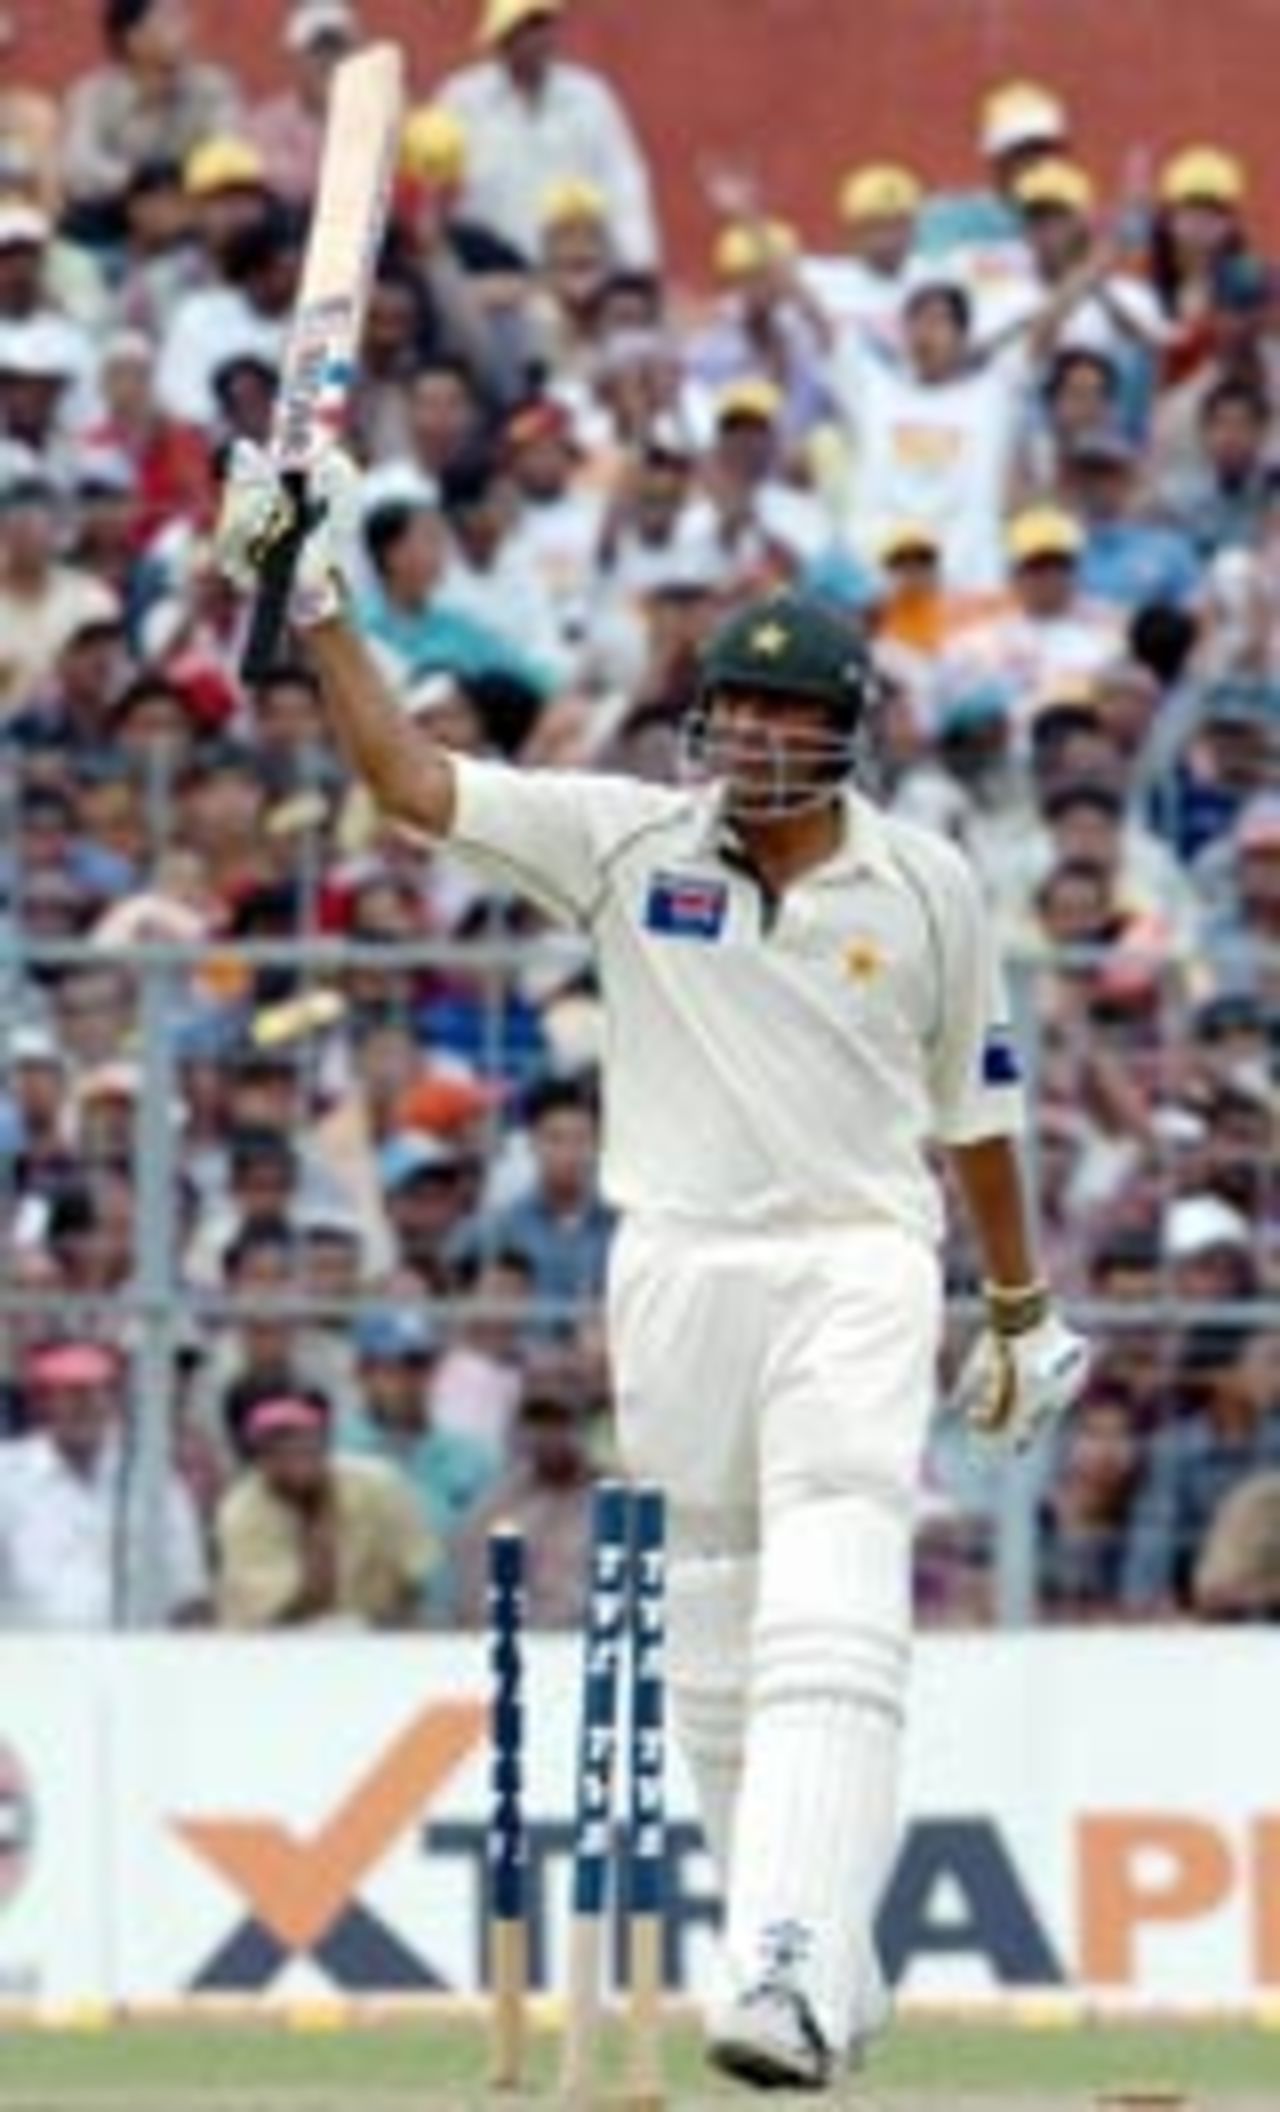 Younis Khan acknowledges the crowd after getting to fifty, India v Pakistan, 2nd Test, Kolkata, March 17, 2005